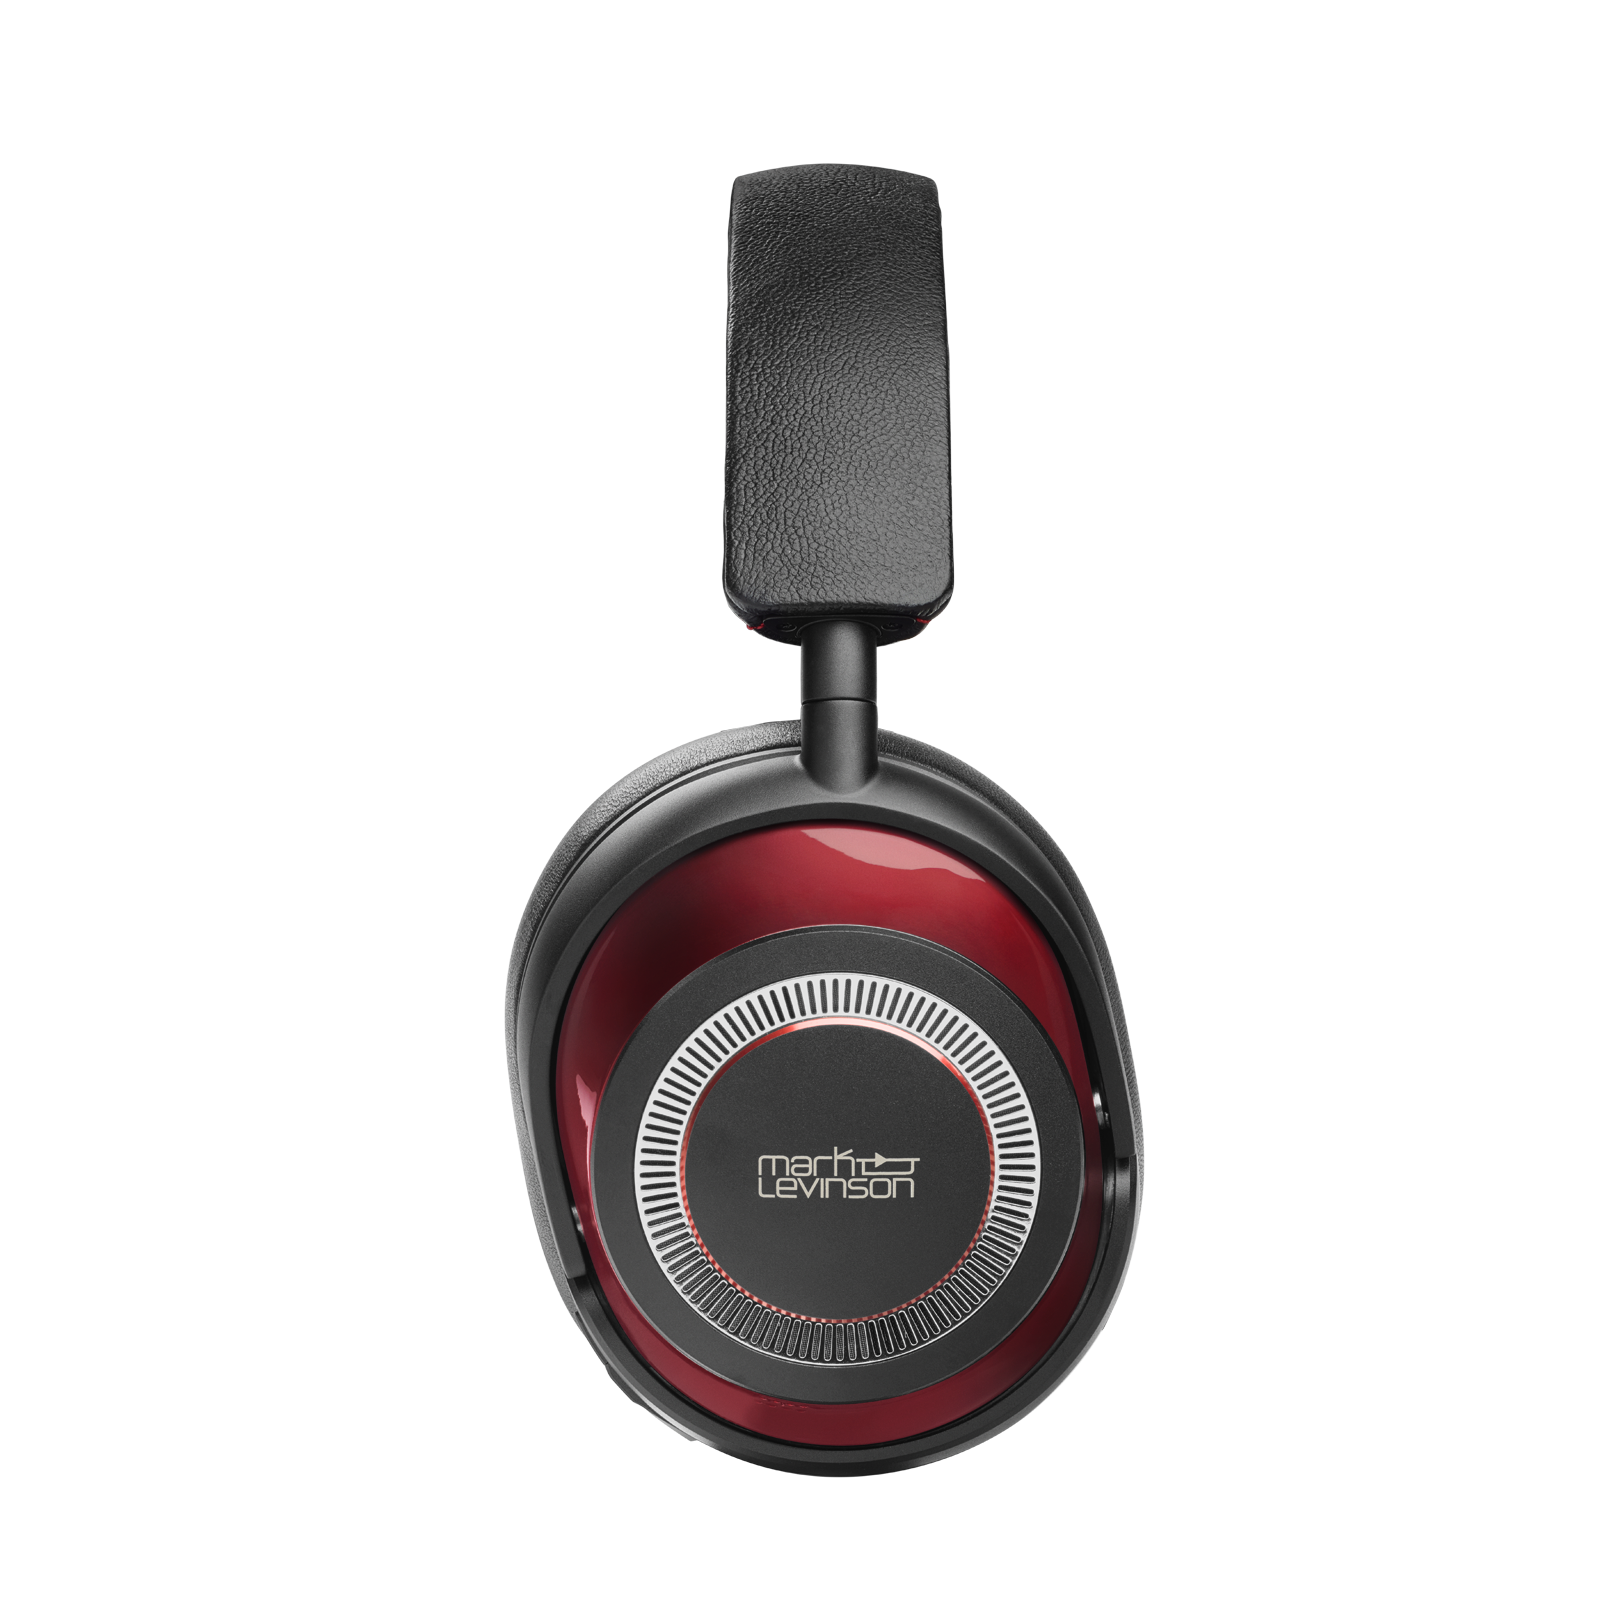 № 5909 - Red - PREMIUM WIRELESS HEADPHONES WITH ANC - Right